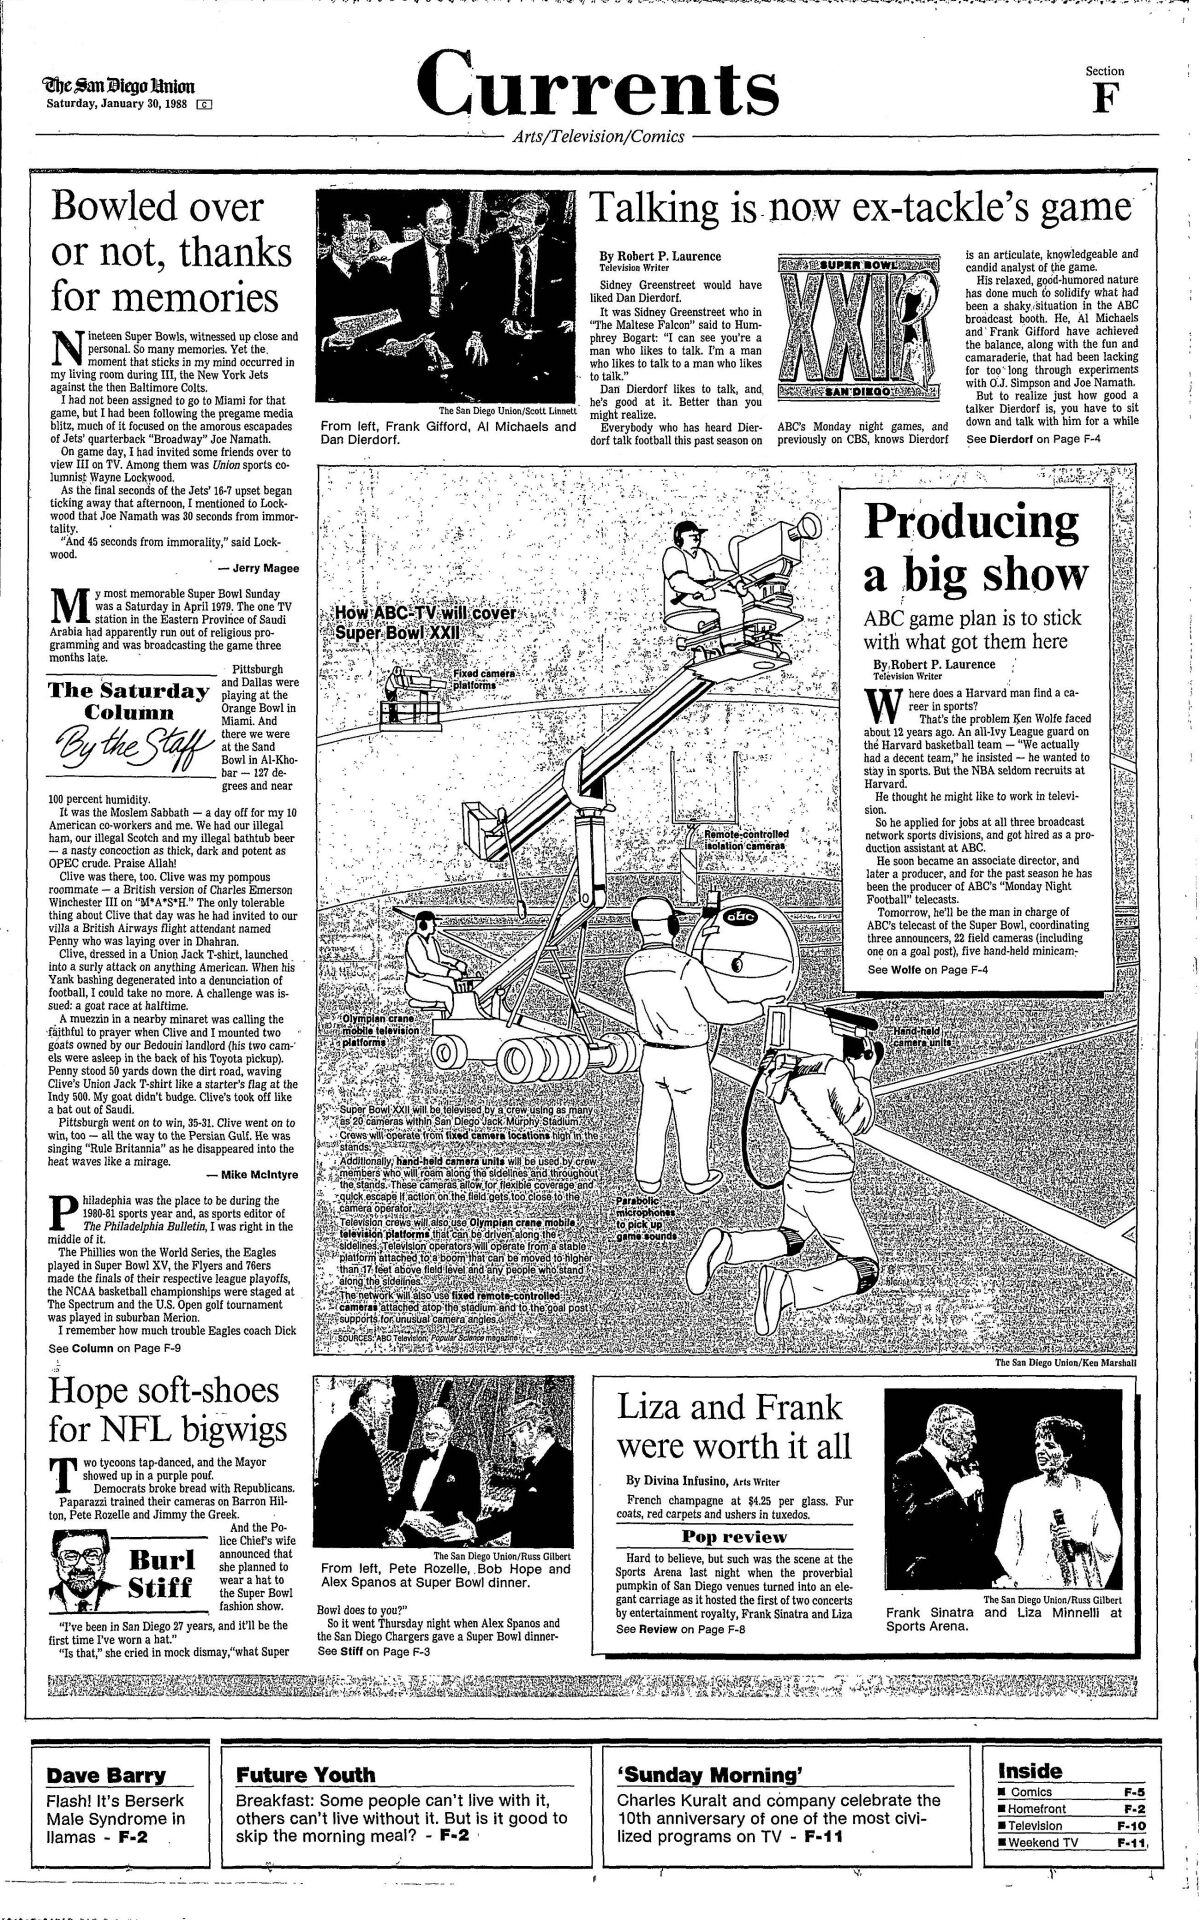 Front page of the Currents section of The San Diego Union, Saturday, Jan. 30, 1988.